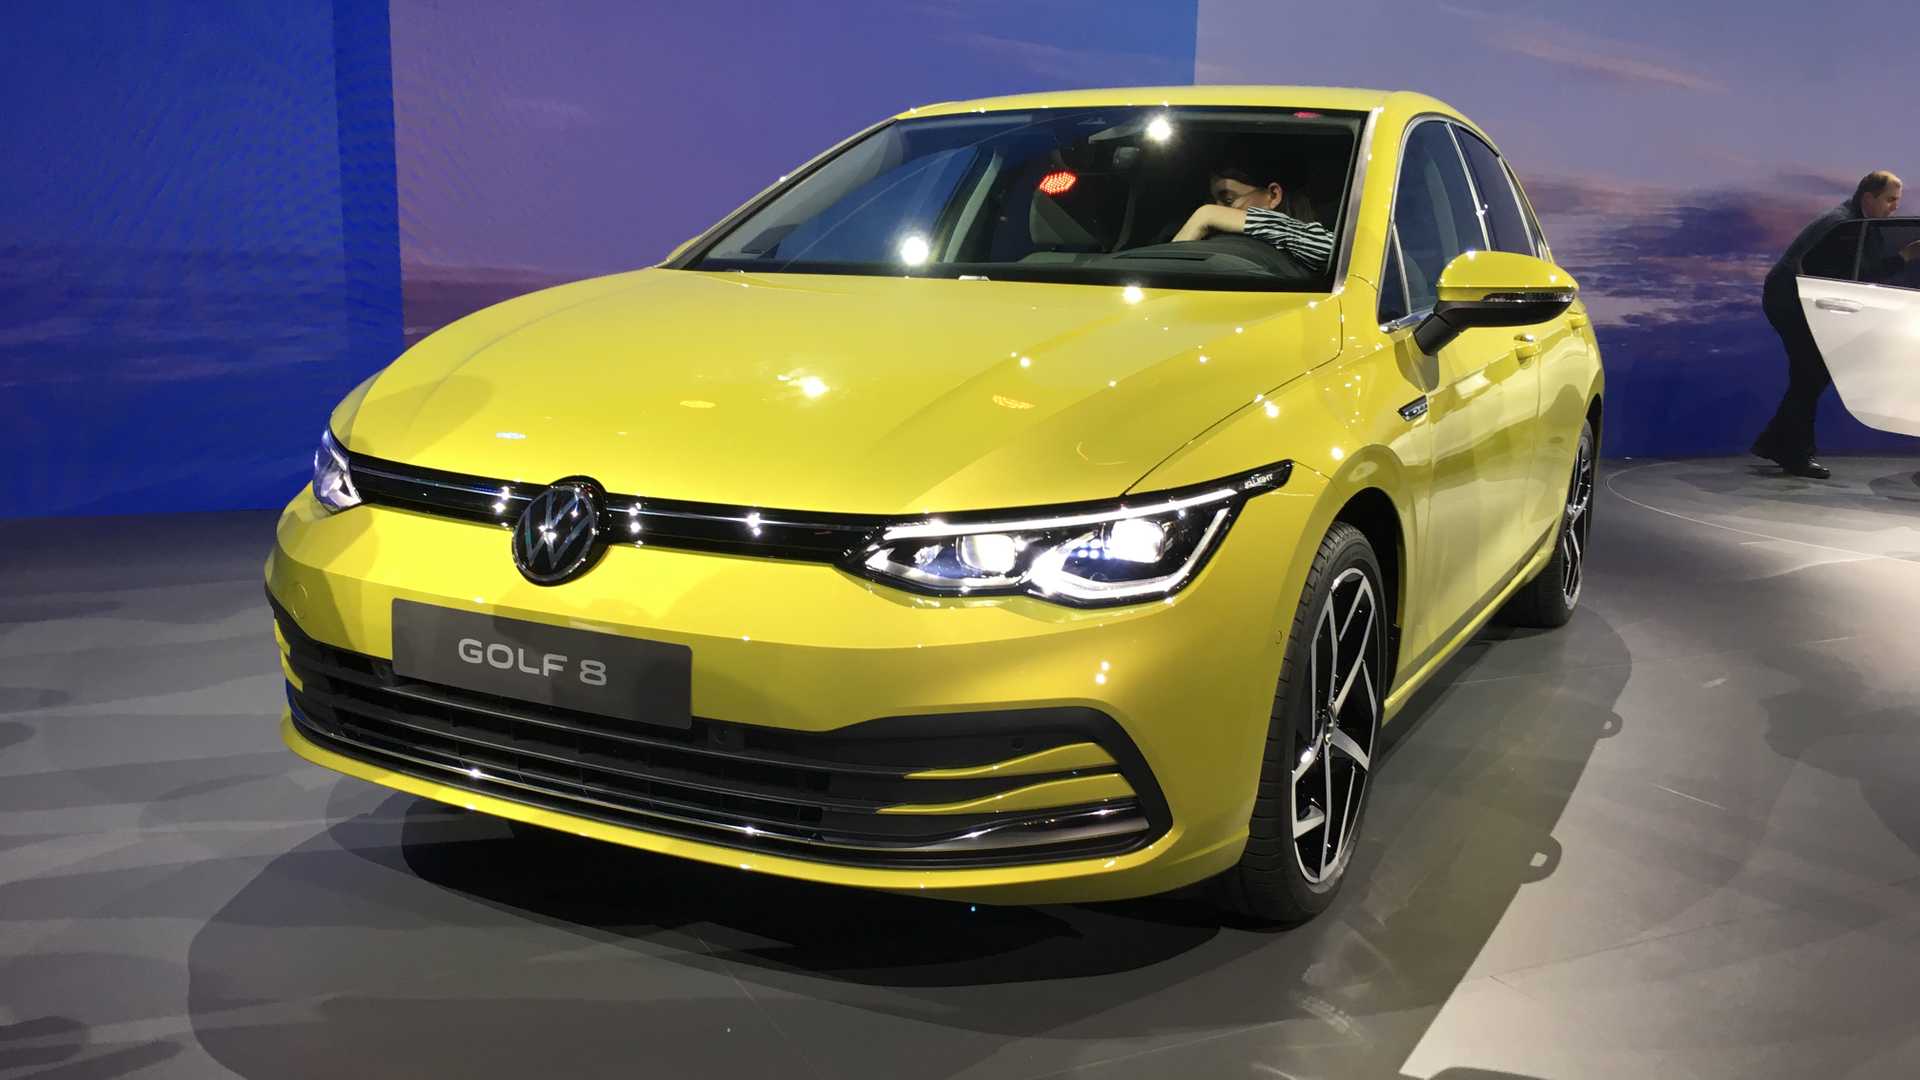 Volkswagen Golf 8 global reveal - VW goes all in on the latest Golf -  Automotive News - AutoTrader